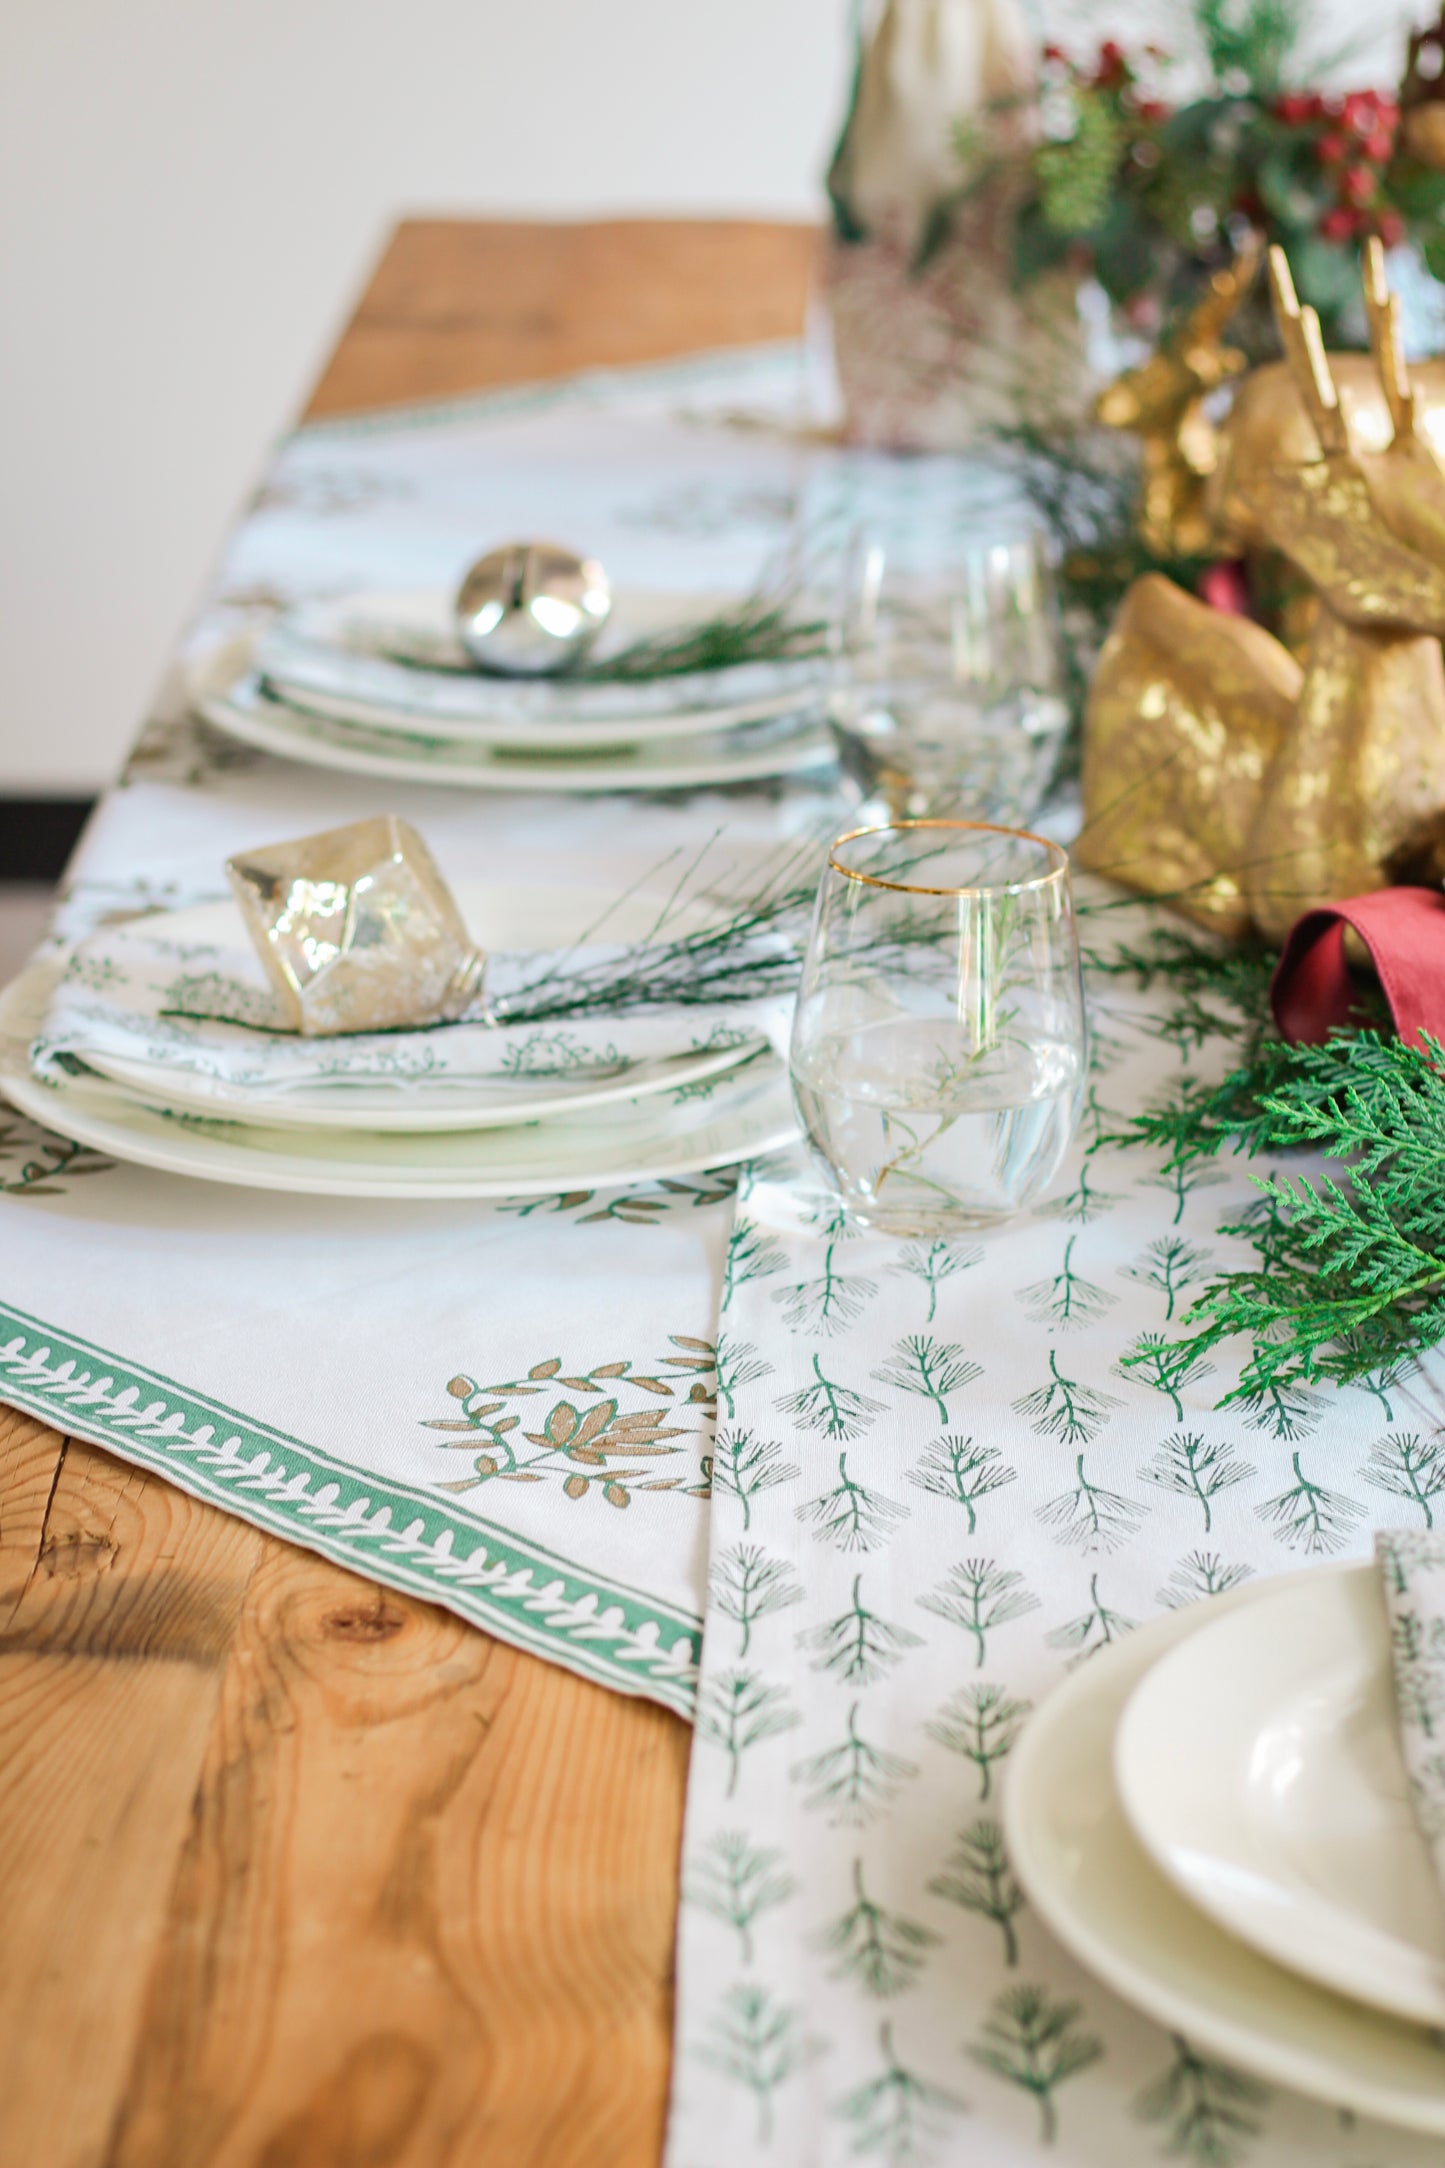 Tablecloth - Lotus (Large), Evergreen & Gold